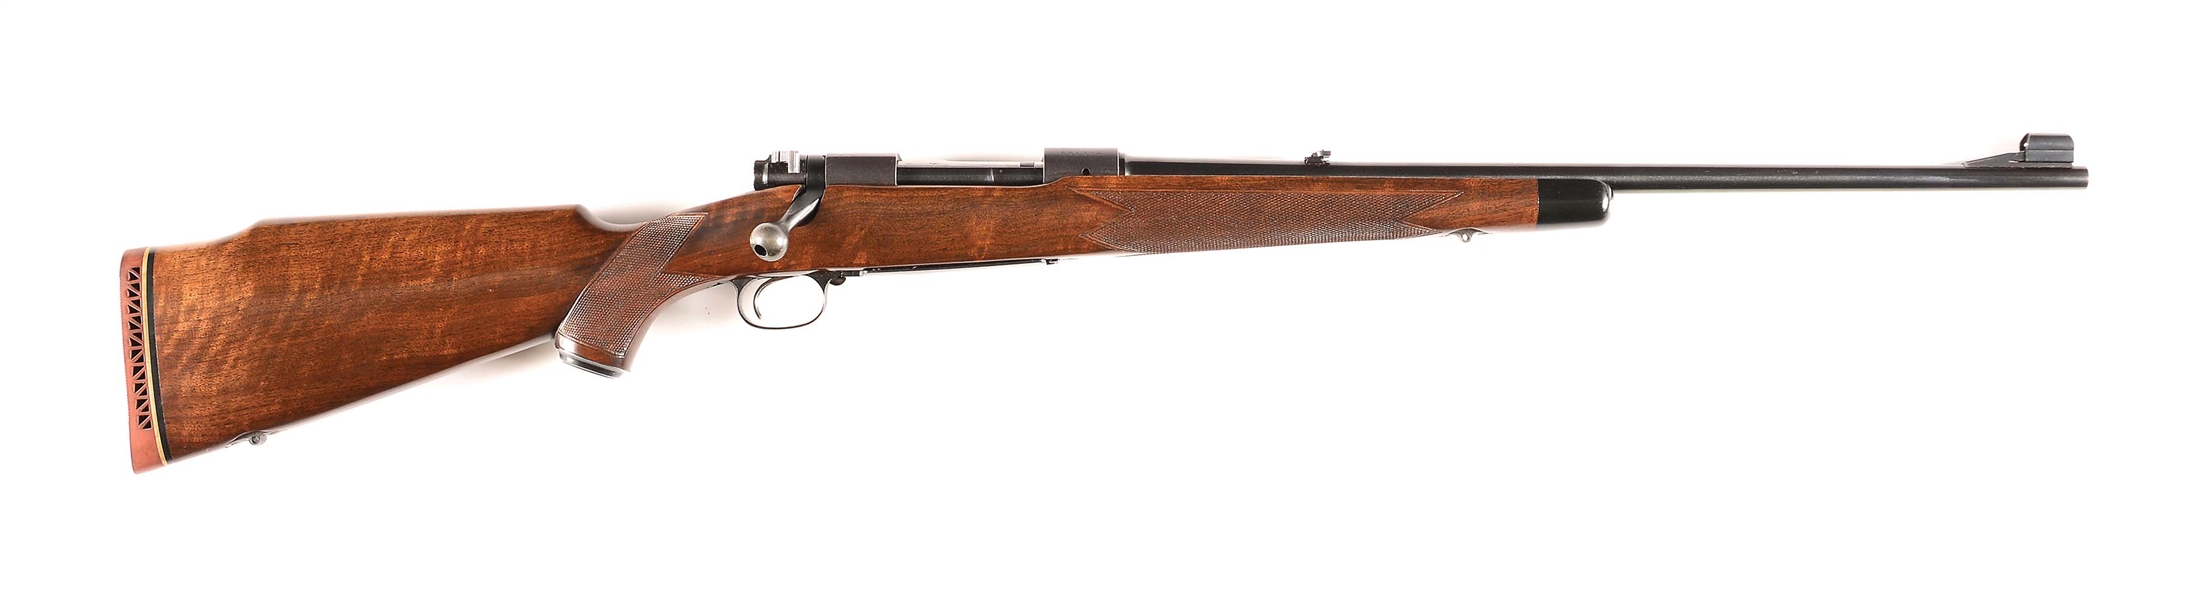 (C) RARE CROSS STYLE SUPERGRADE FEATHERWEIGHT WINCHESTER MODEL 70 .264 WINCHESTER MAGNUM BOLT ACTION RIFLE